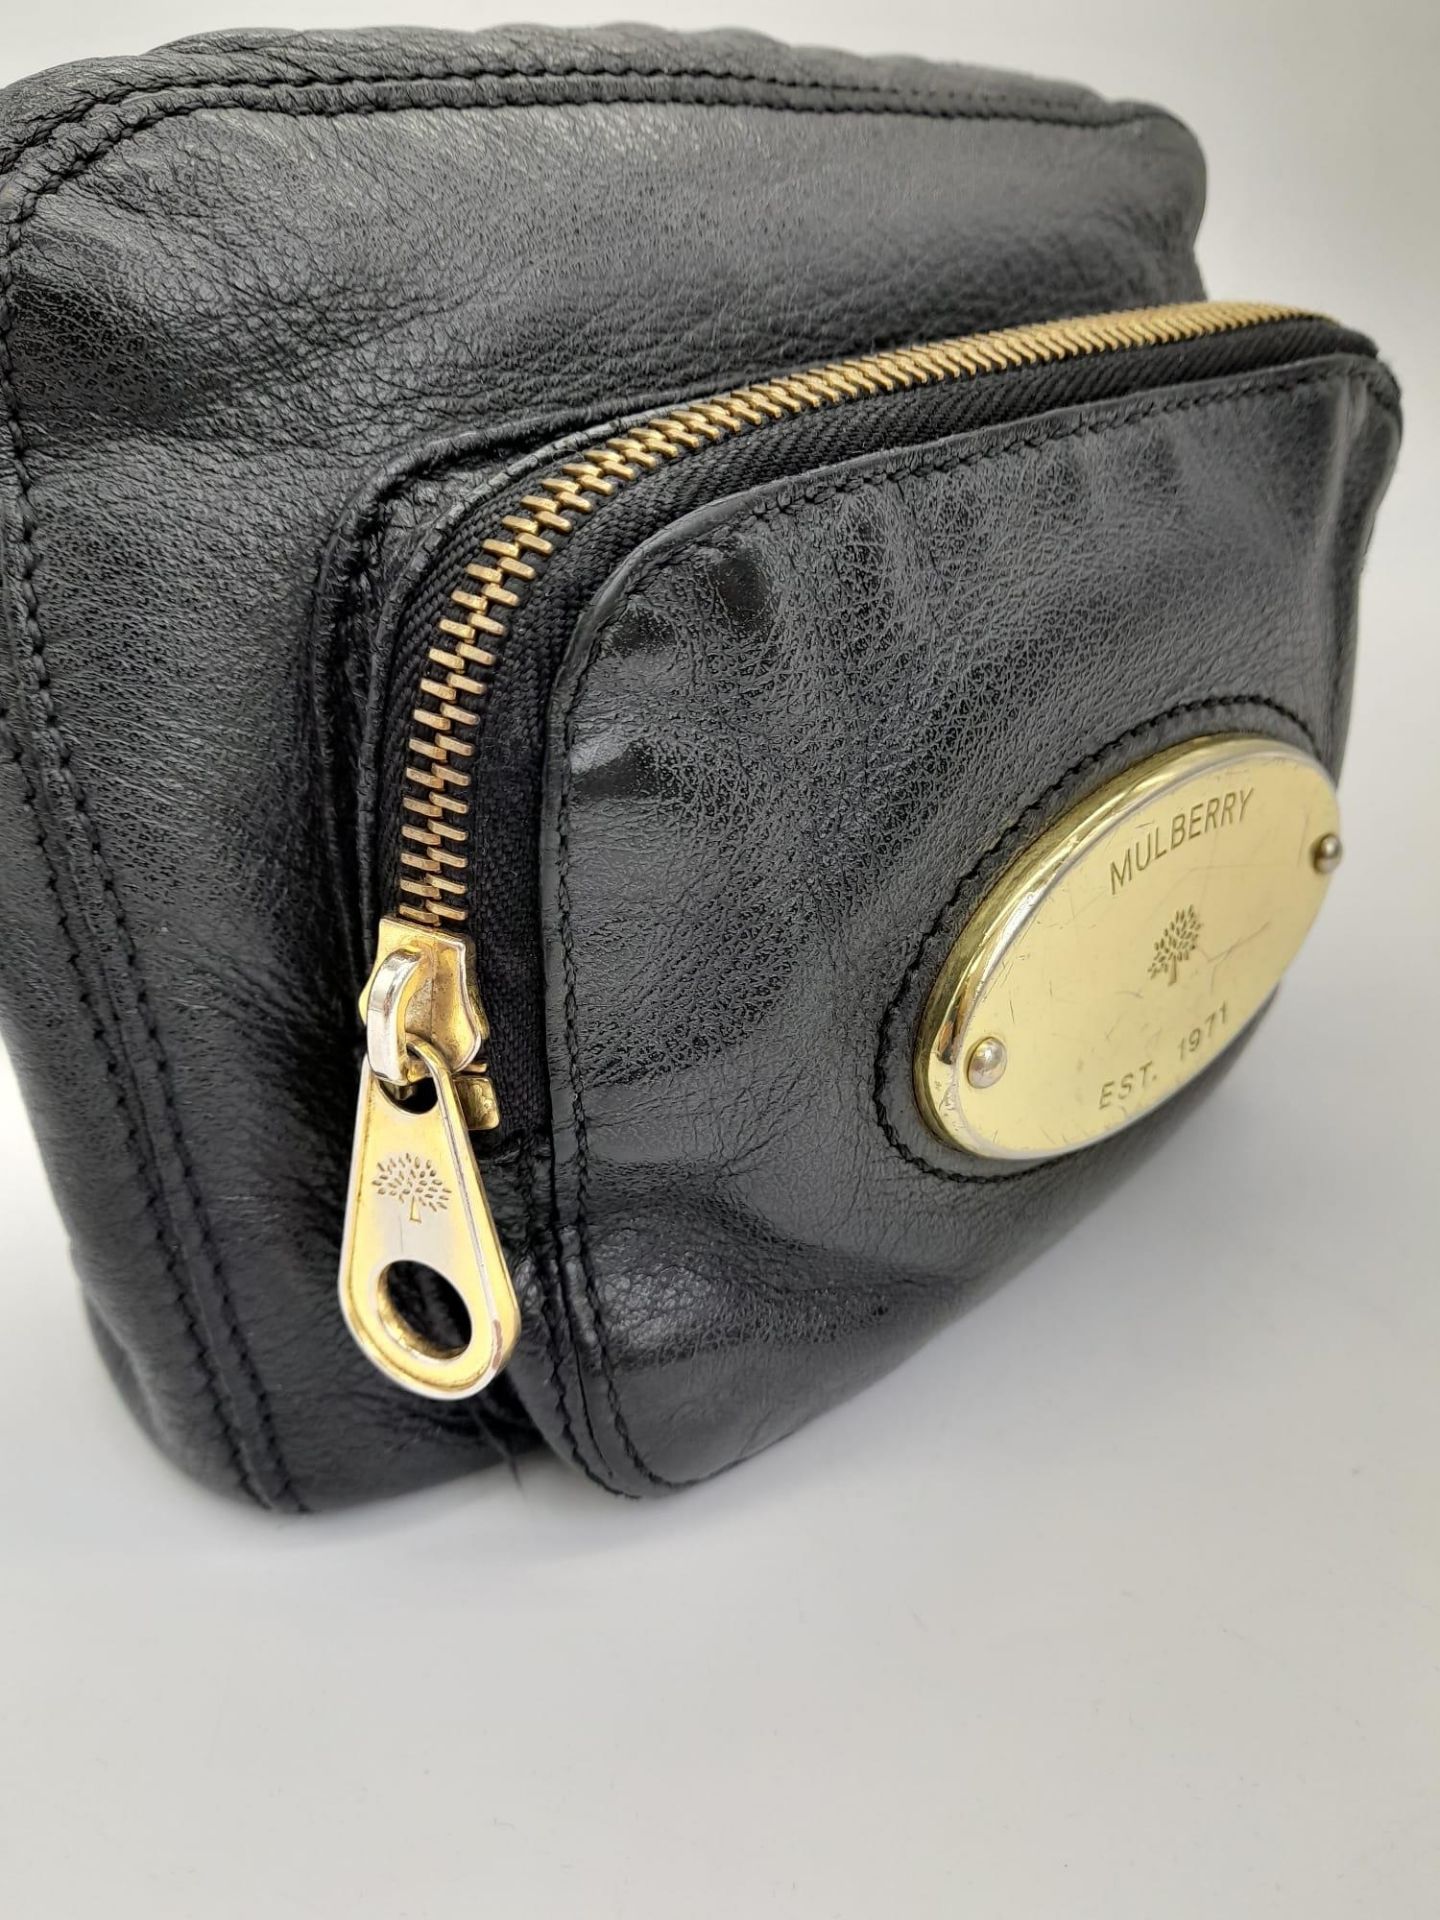 A MULBERRY DOUBLE ZIP SMALL SHOULDER BAG IN SOFT BLACK LEATHER. SEE PHOTO'S FOR CONDITION.. - Bild 4 aus 6